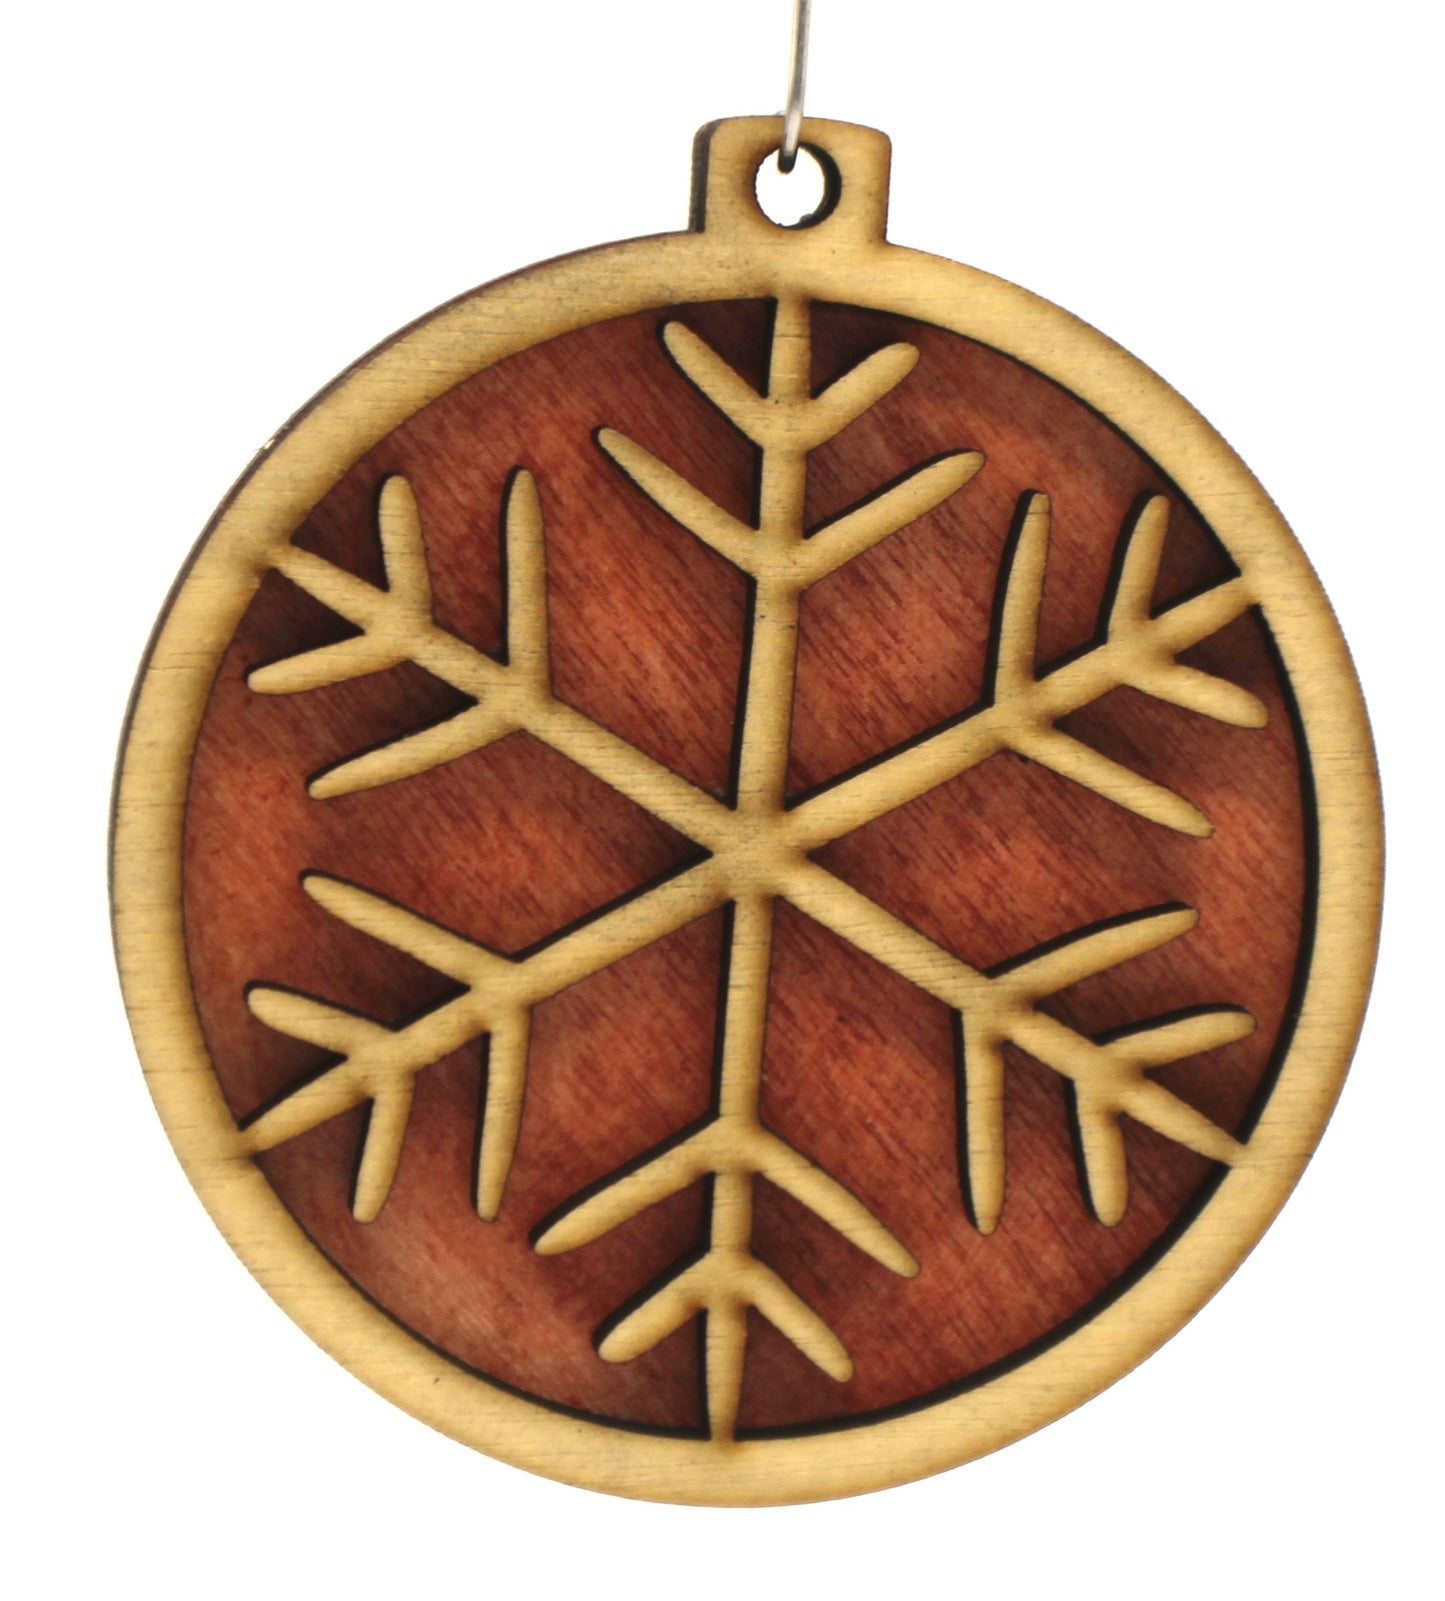 Old fashioned Snowflake Christmas Ornament version 2